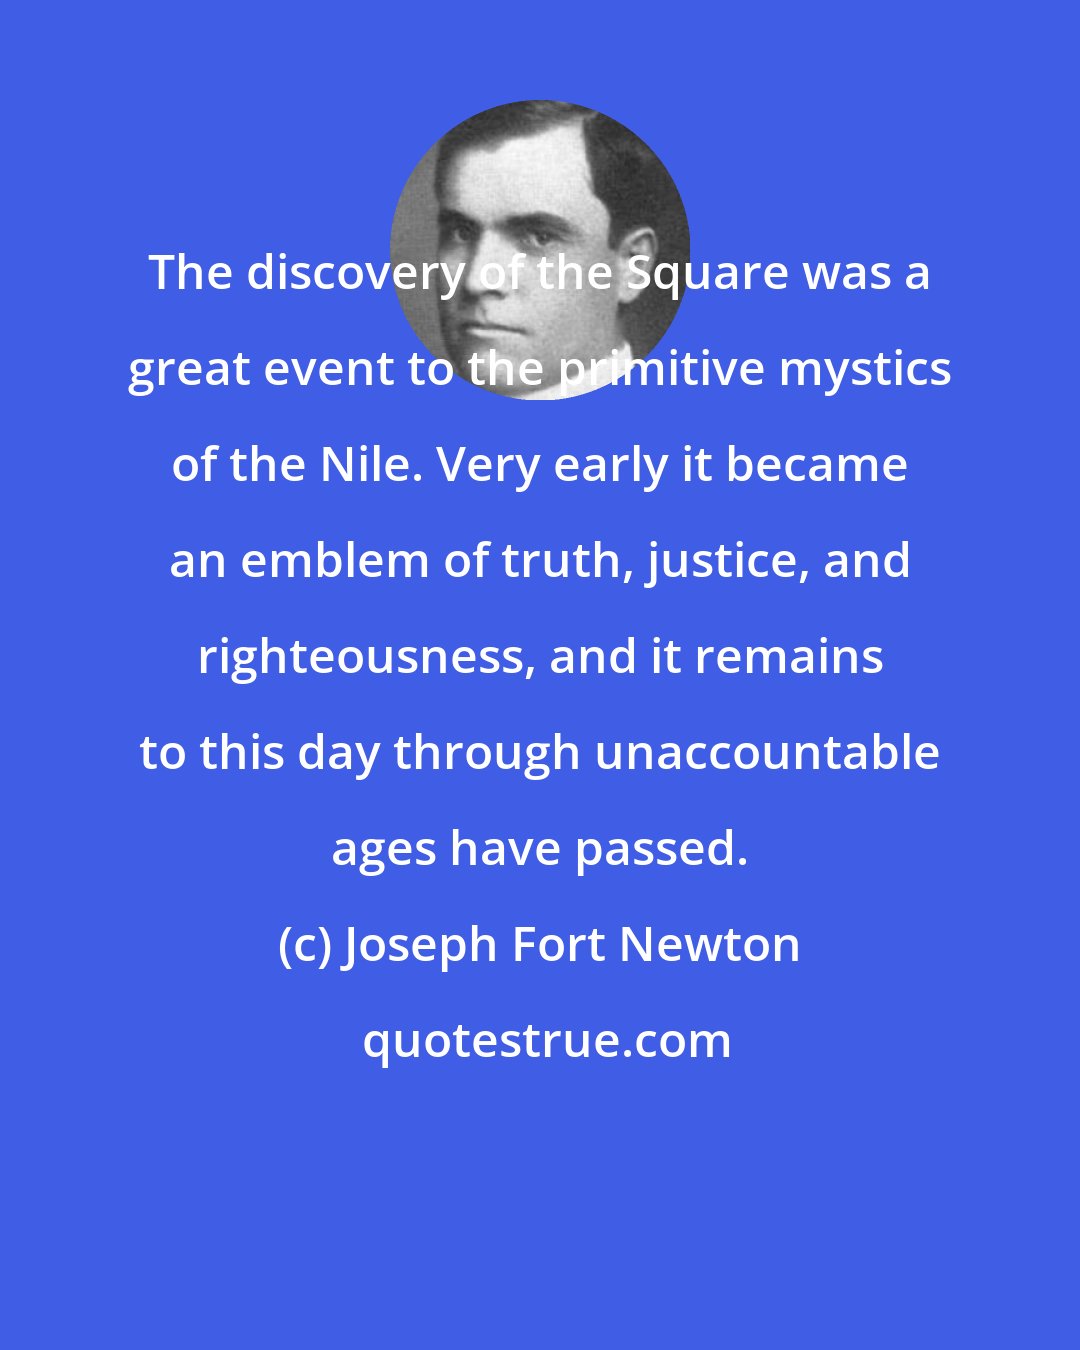 Joseph Fort Newton: The discovery of the Square was a great event to the primitive mystics of the Nile. Very early it became an emblem of truth, justice, and righteousness, and it remains to this day through unaccountable ages have passed.